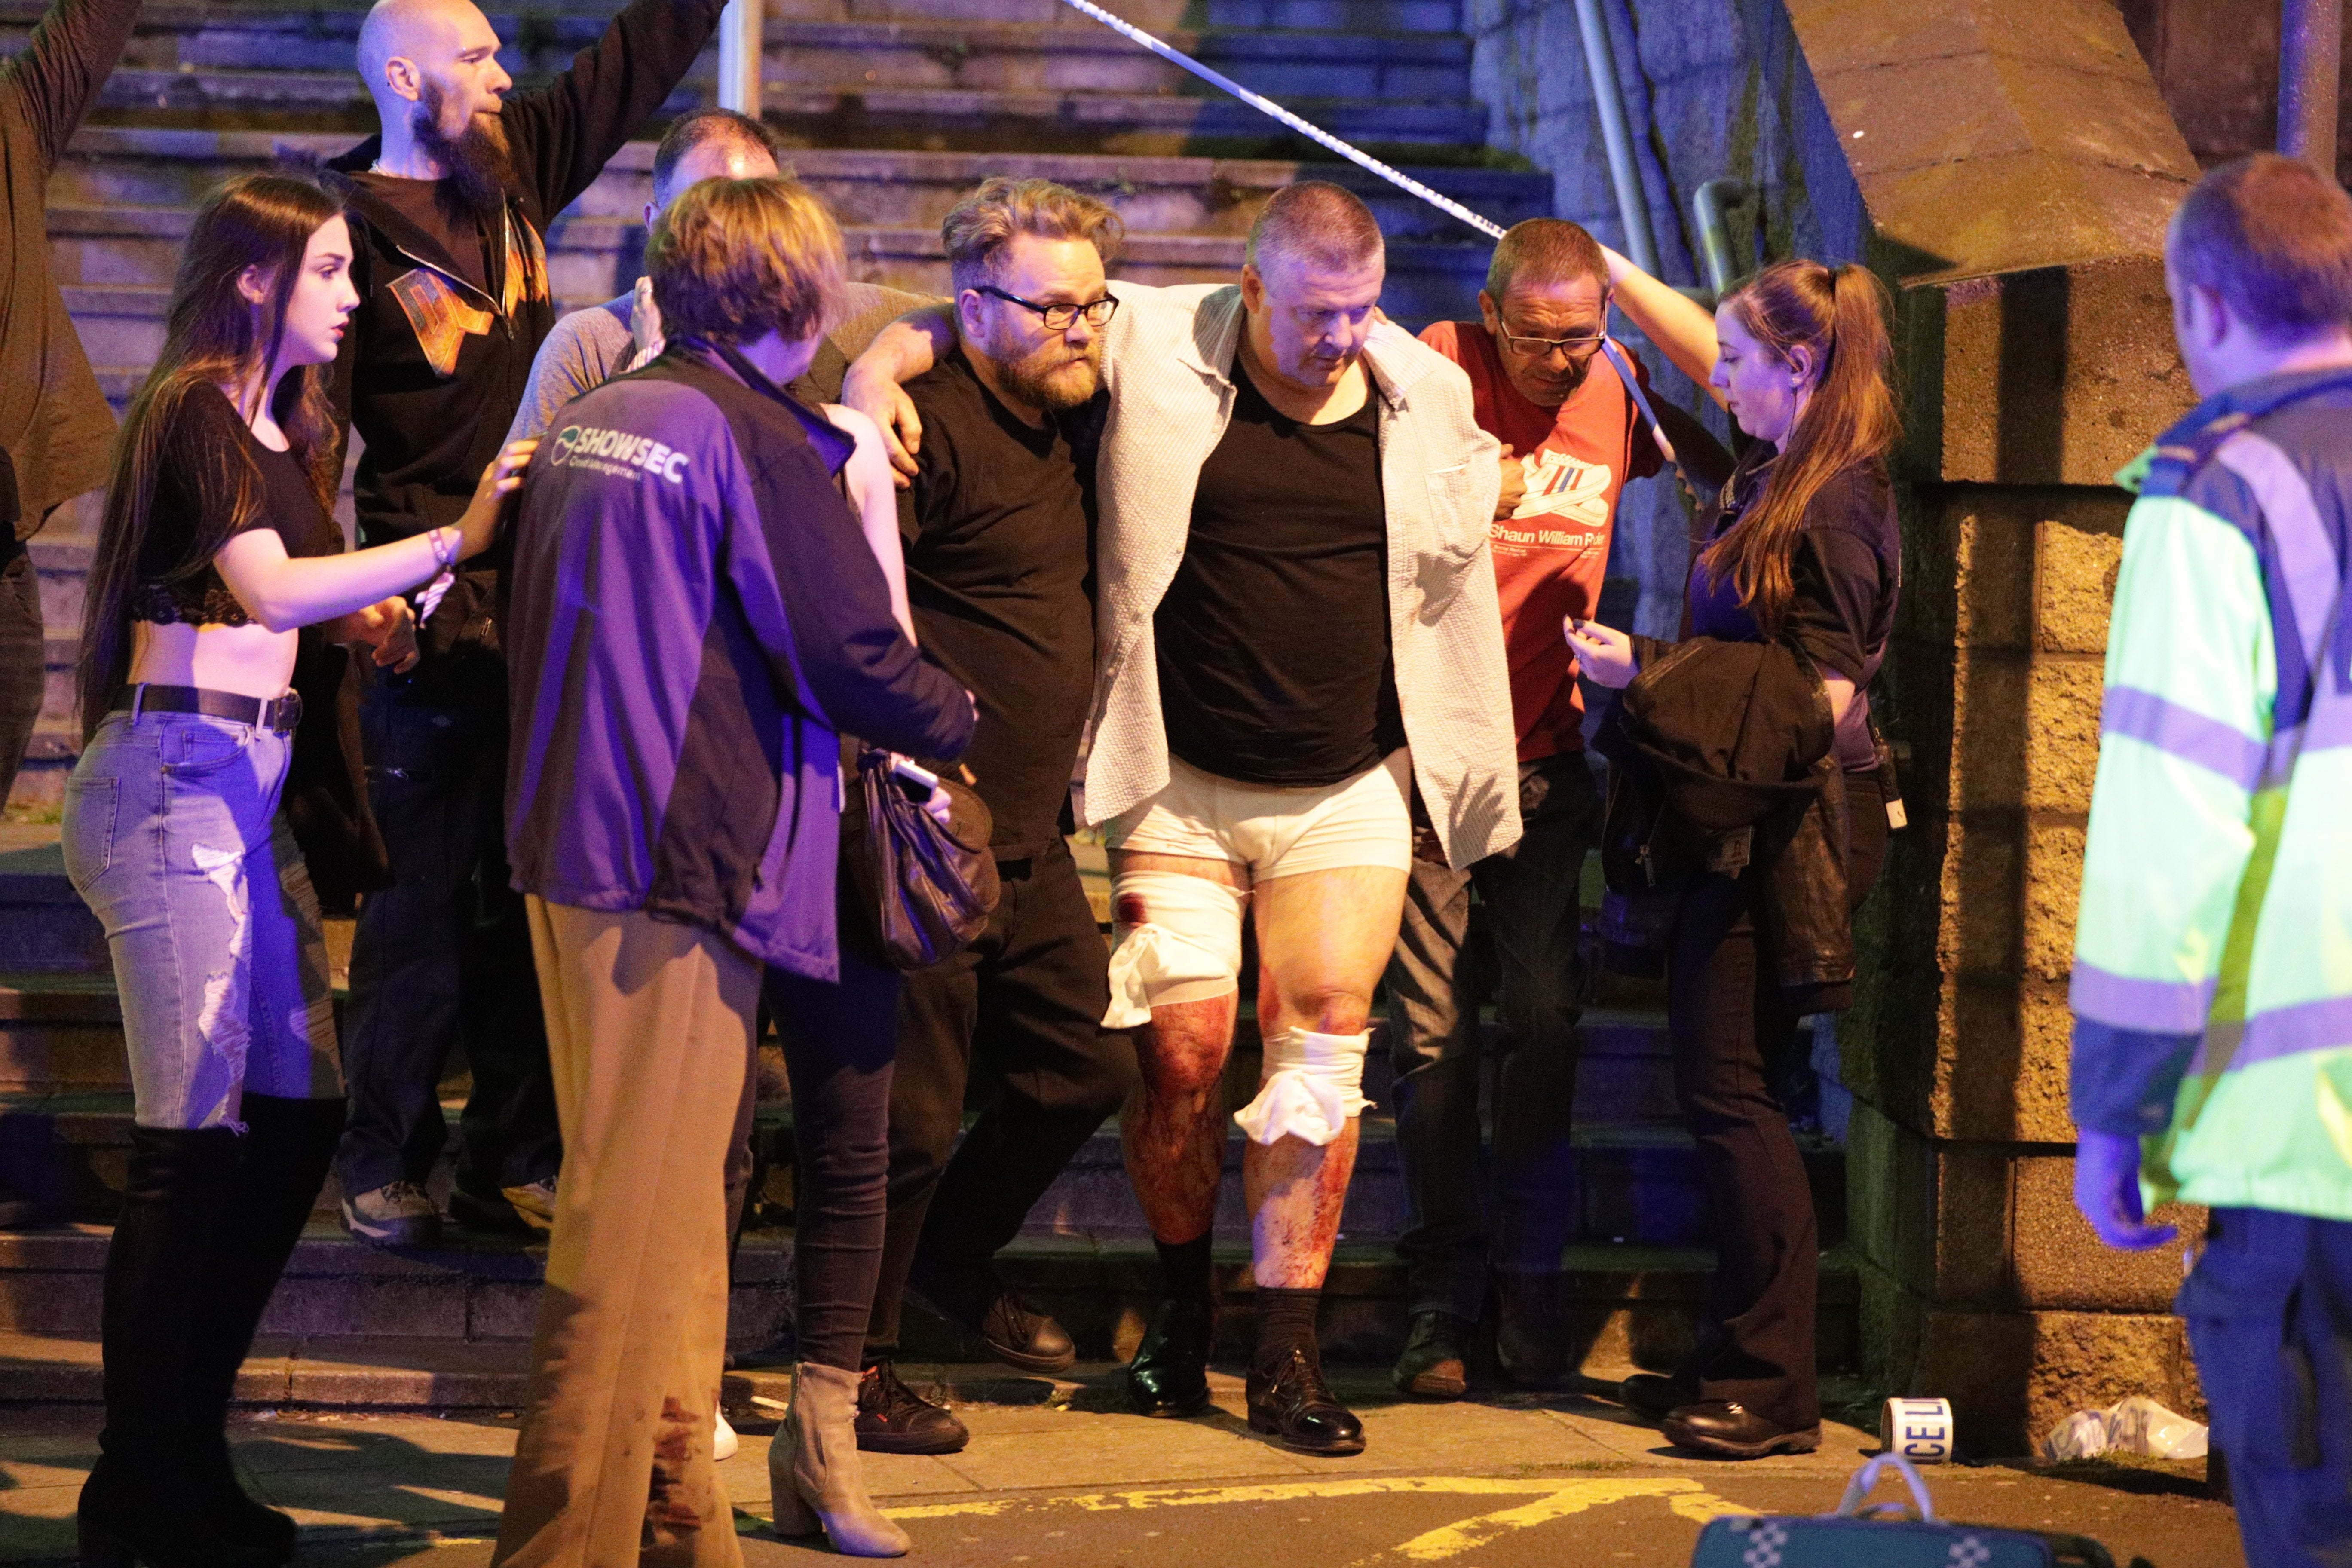 At Least 19 Dead After Explosion at Ariana Grande Concert in Manchester
